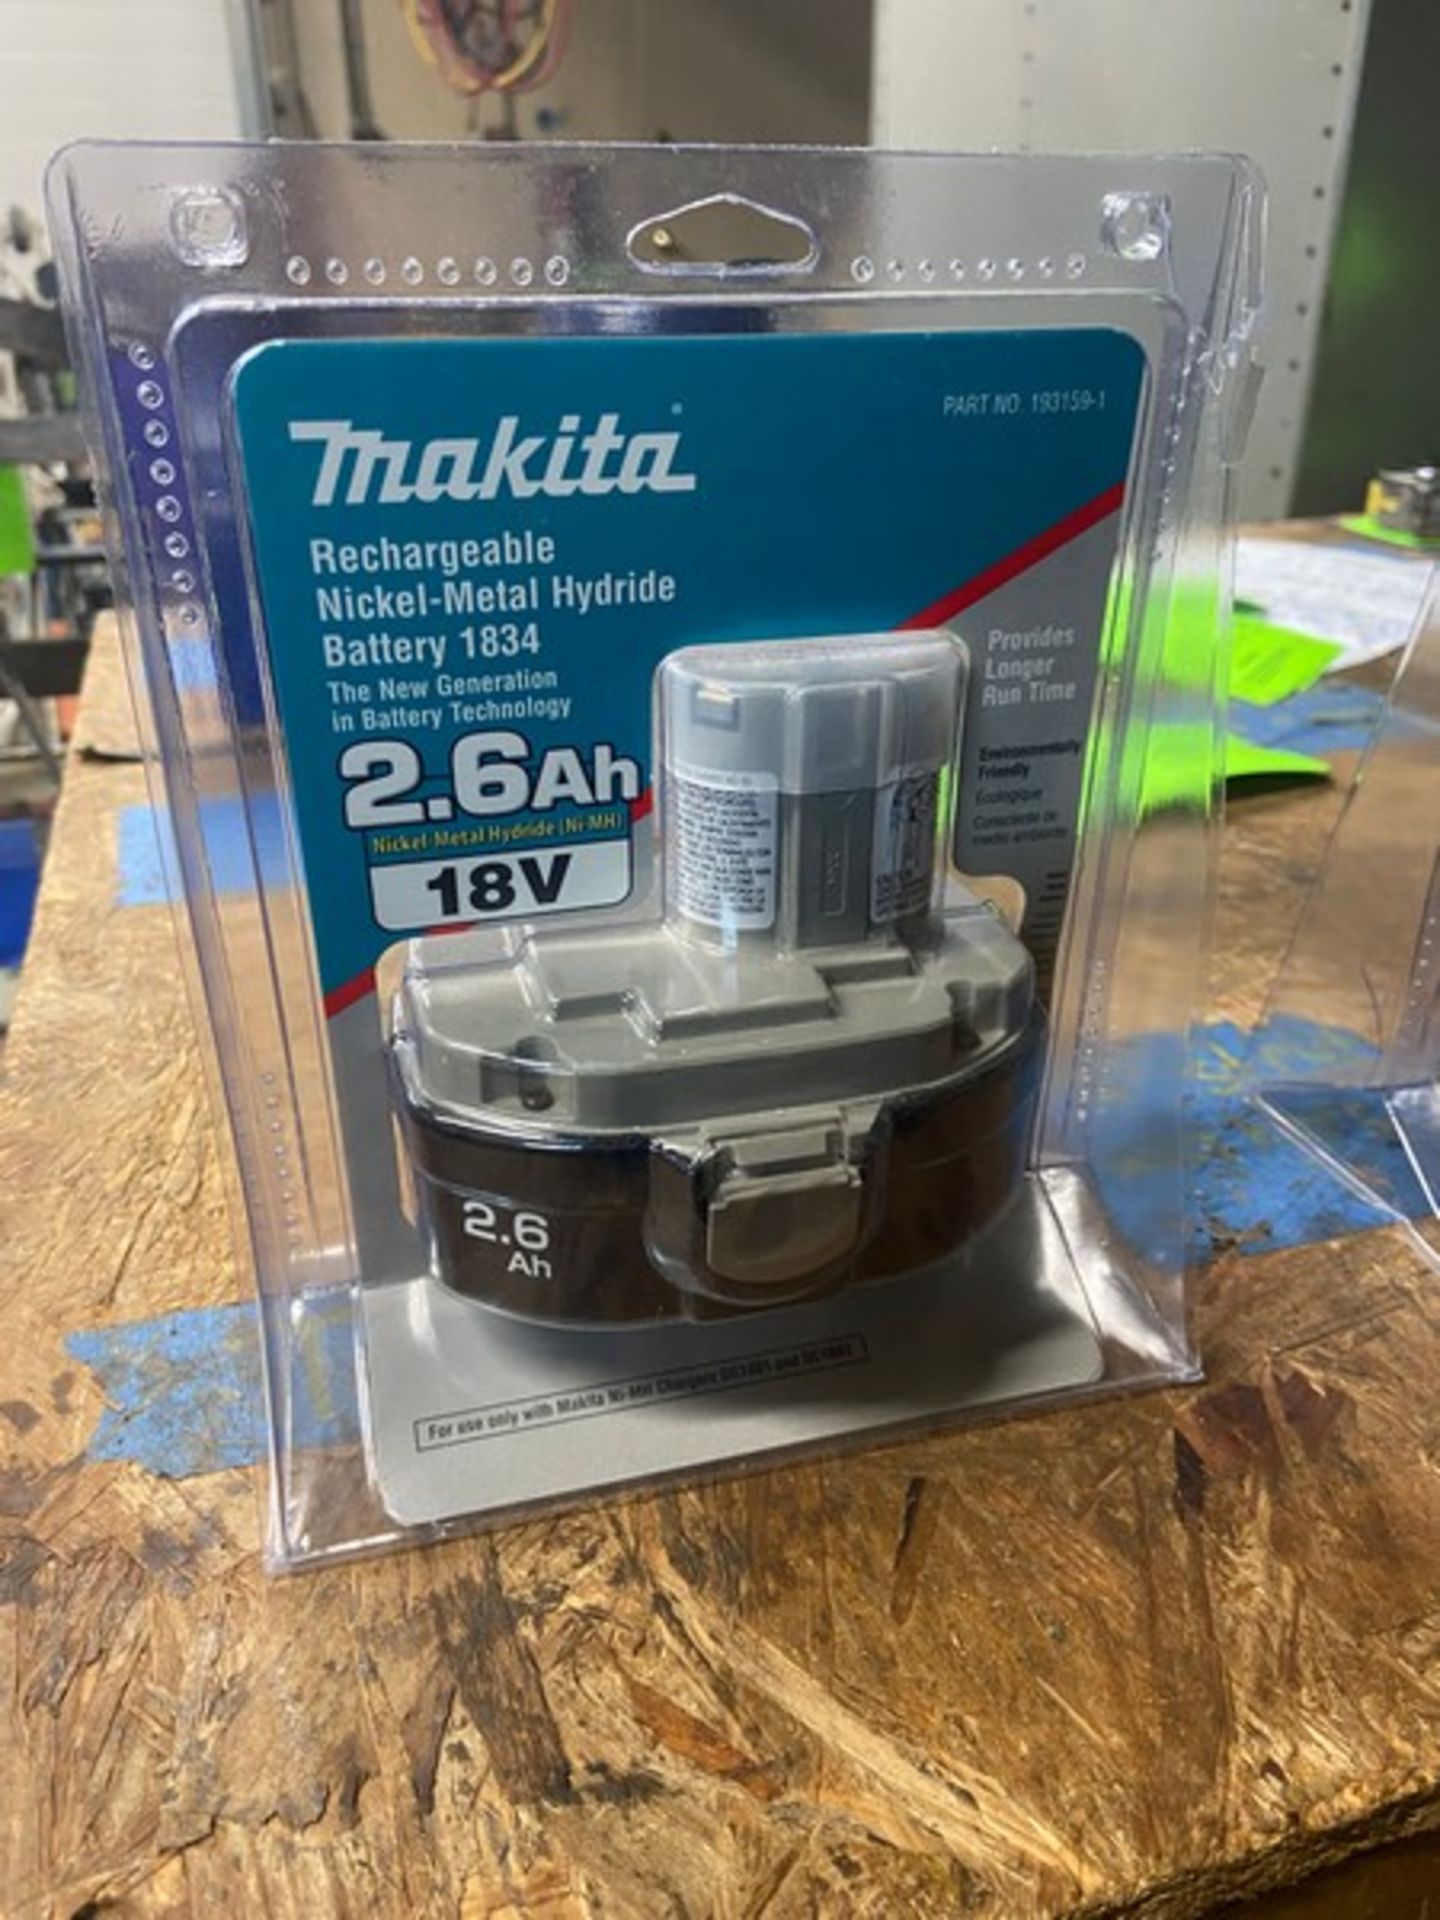 NEW Makita Regardeable Nickel-Metal Hydride Battery 1834, 18 Volts (LOCATED IN MONROEVILLE, PA) - Image 4 of 6